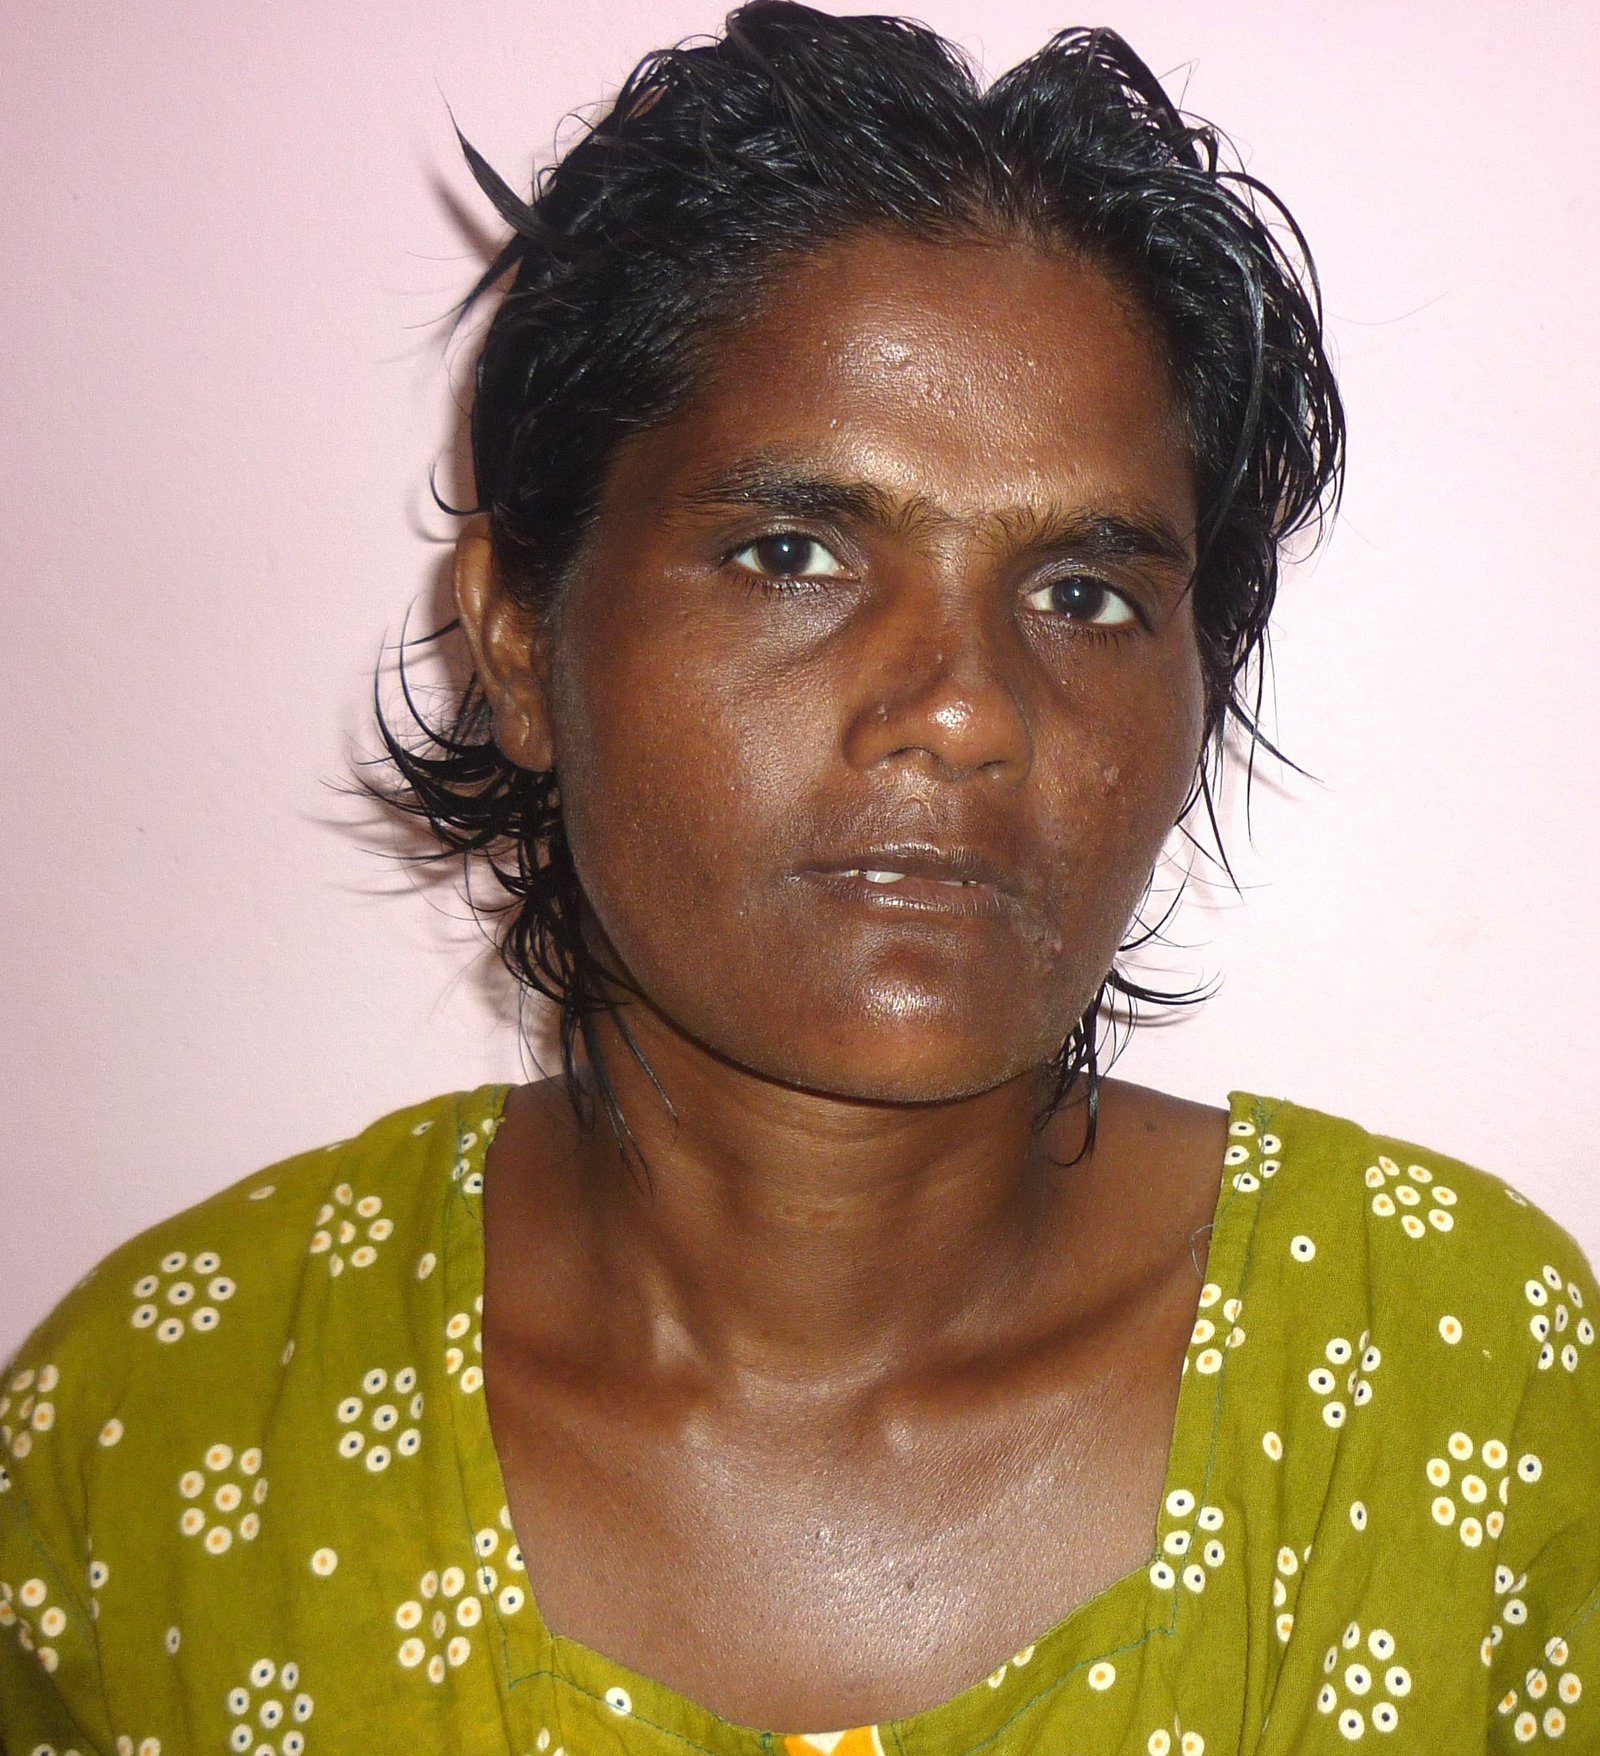 An inmate from vandanam Medical College